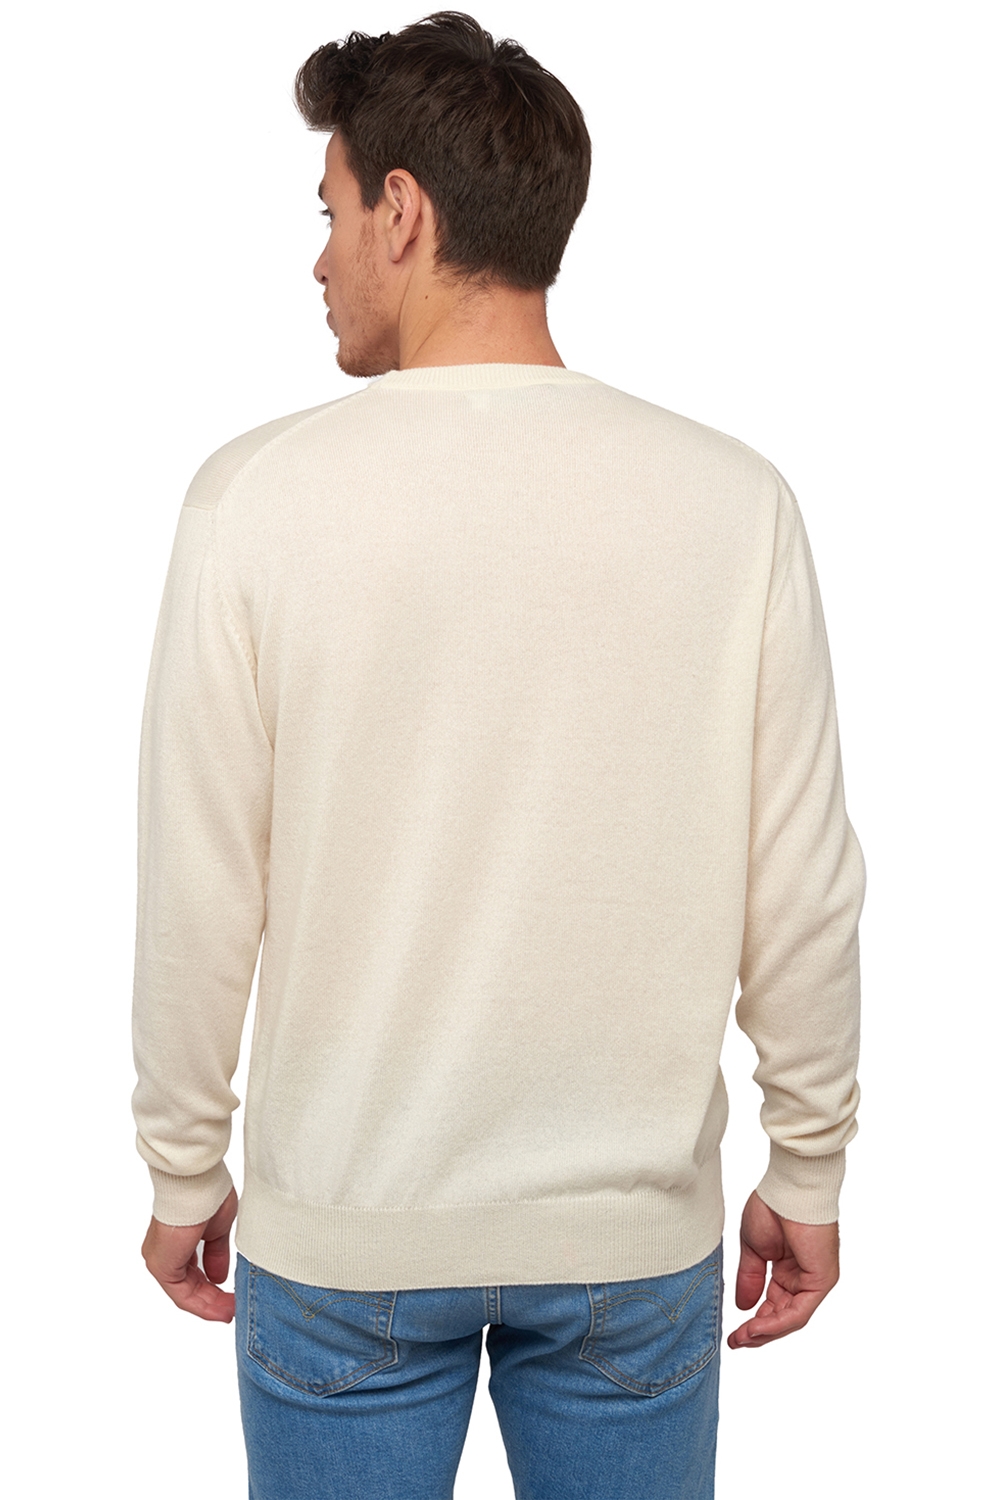 Cachemire Naturel pull homme col rond natural ness natural ecru 2xl